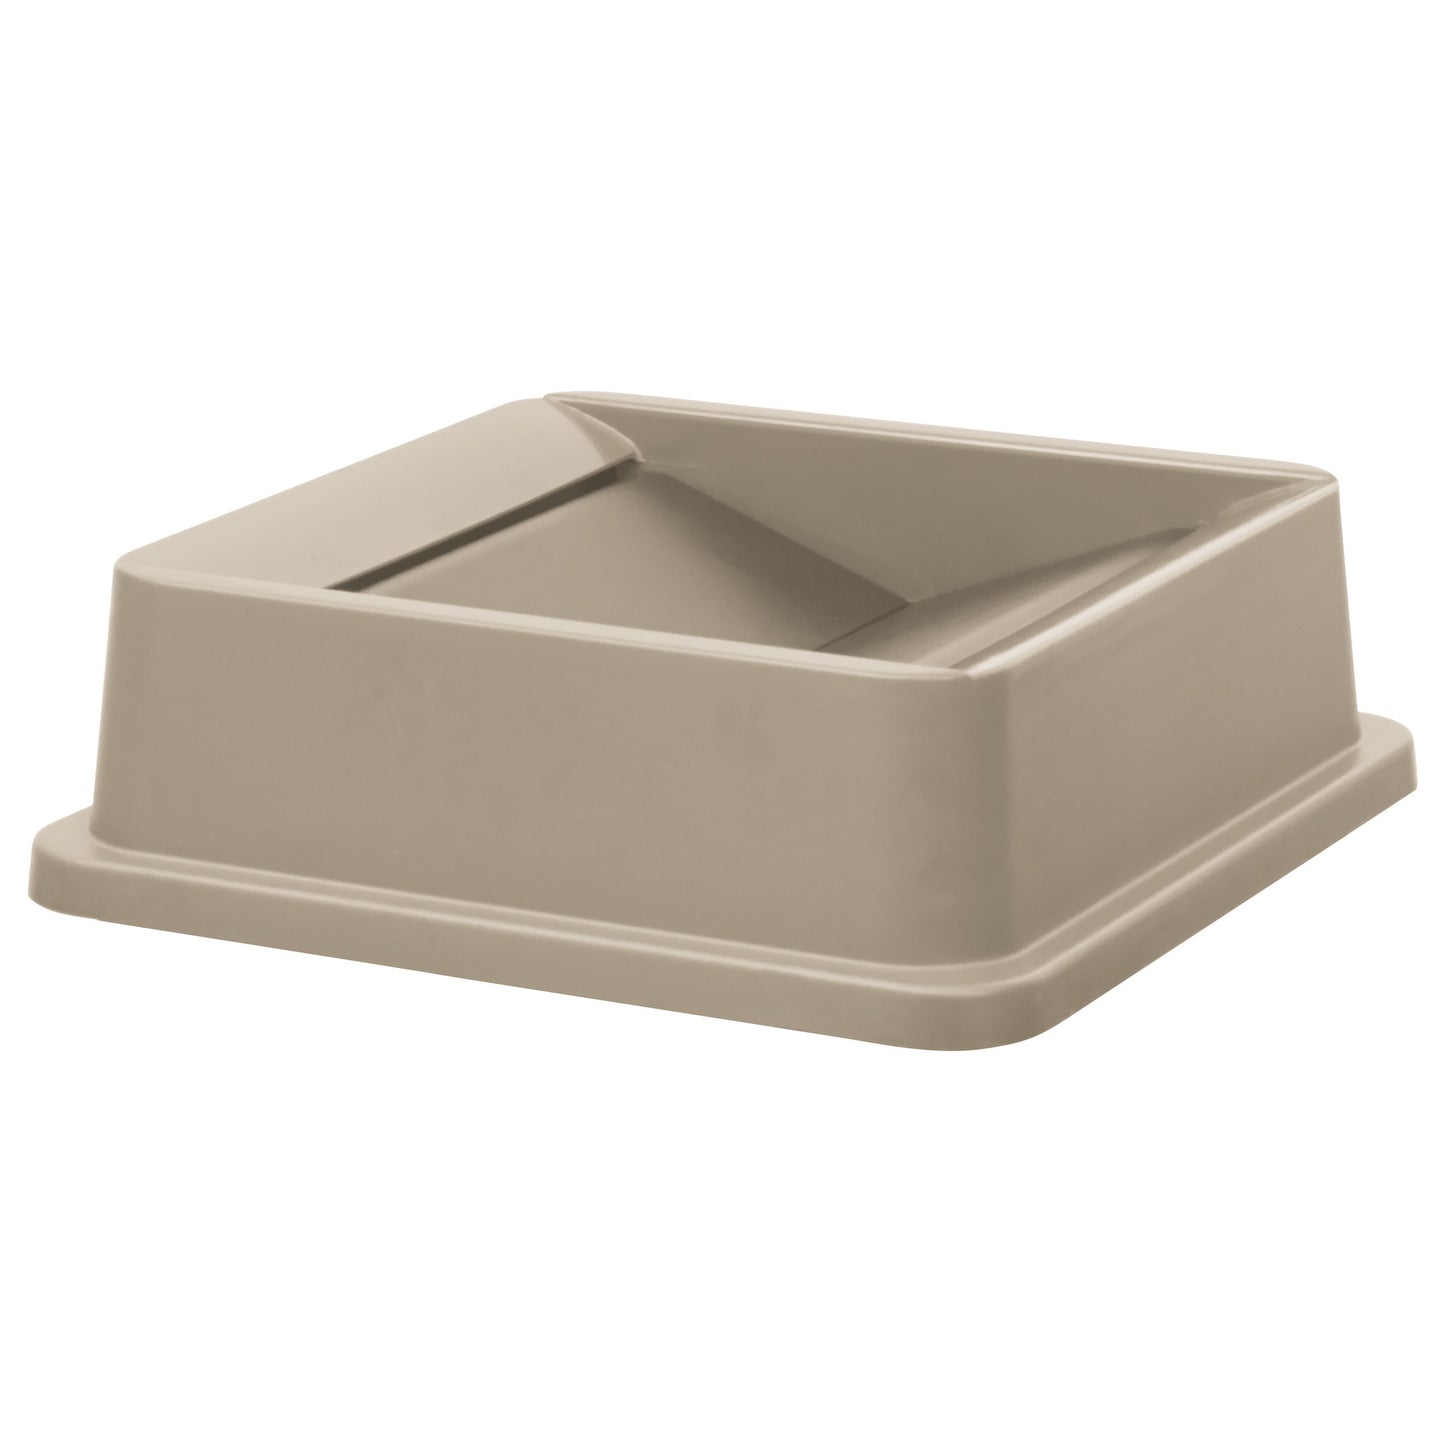 PTCSL-23BE - Tall Square Trash Can Lid, Swing - 23 Gallon, Beige